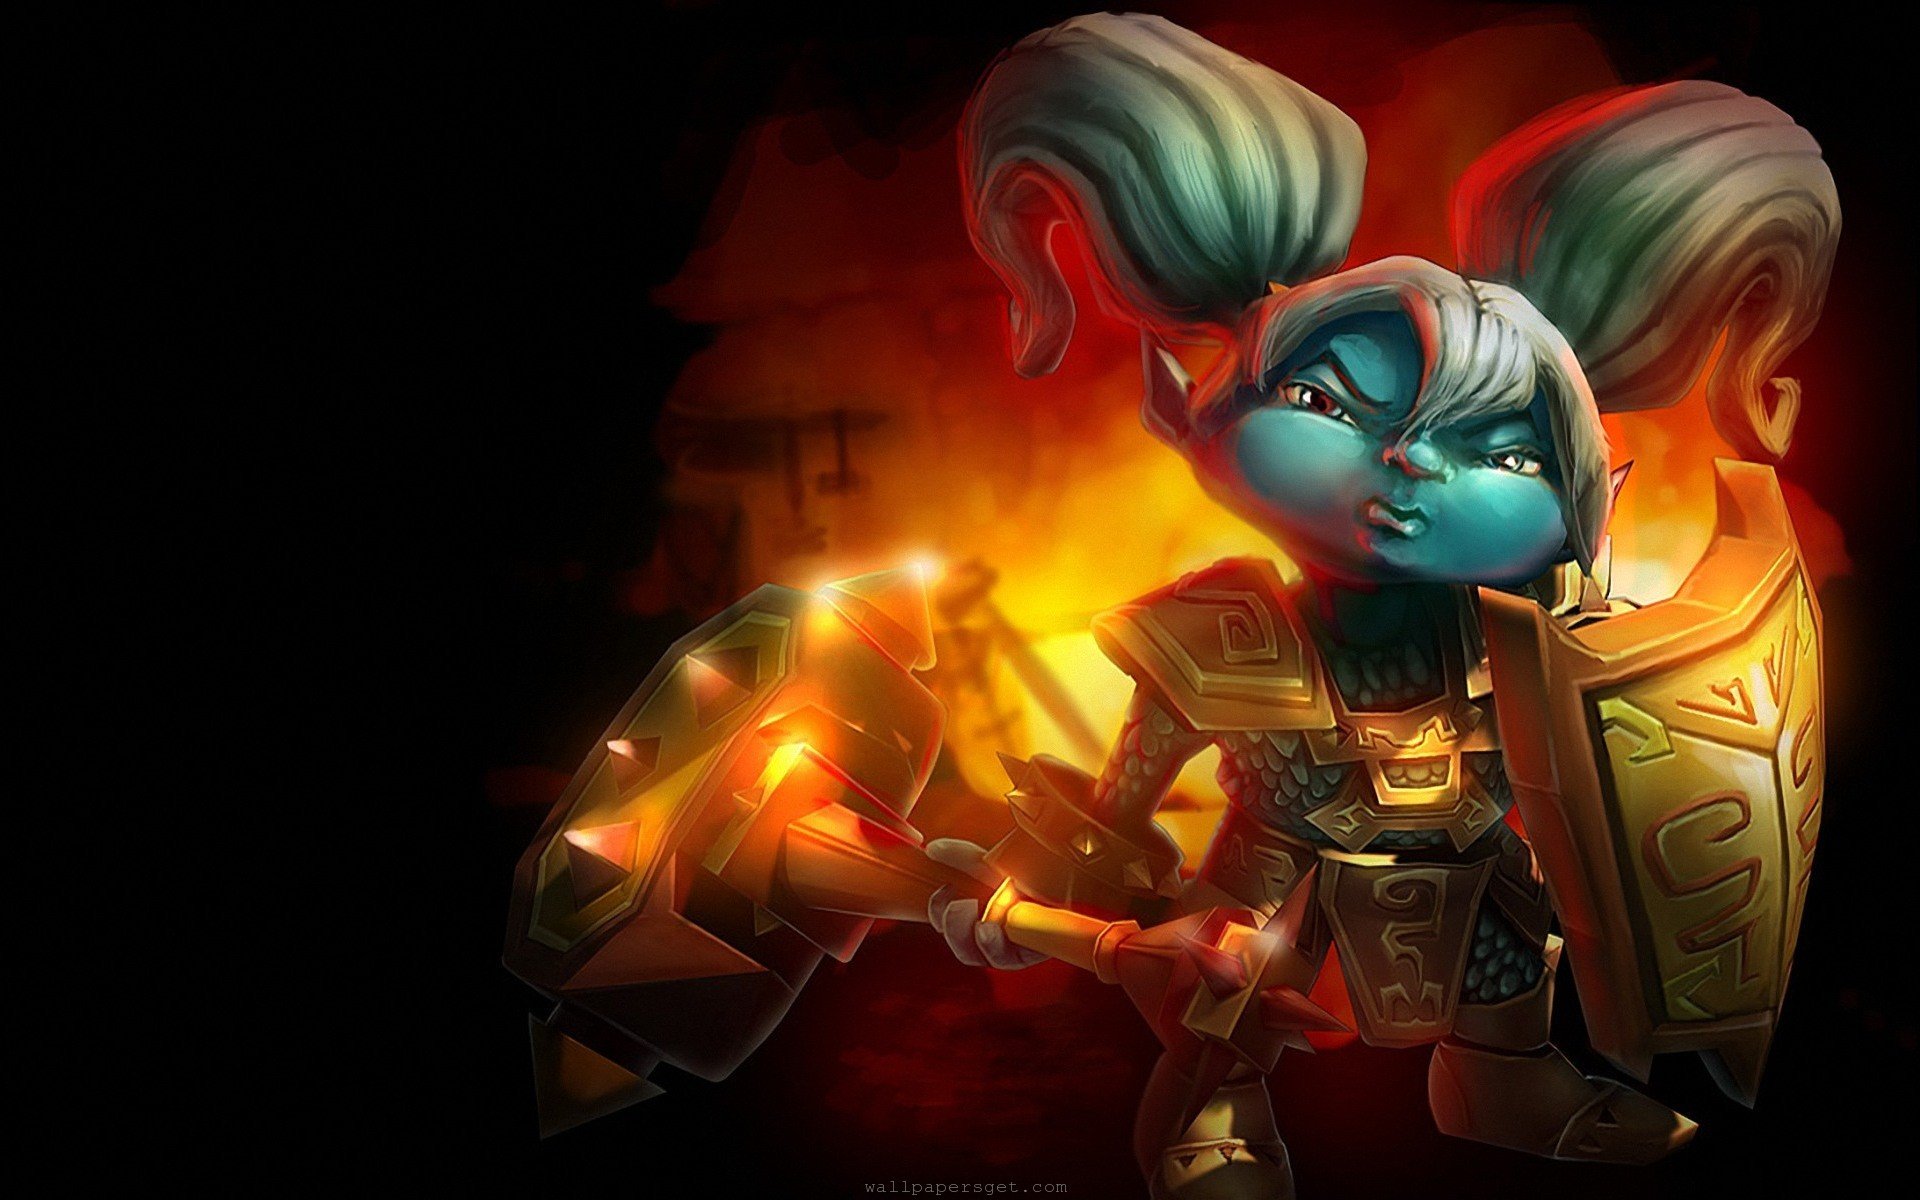 Poppy (League Of Legends) background ID:173754 for hd 1920x1200 PC.